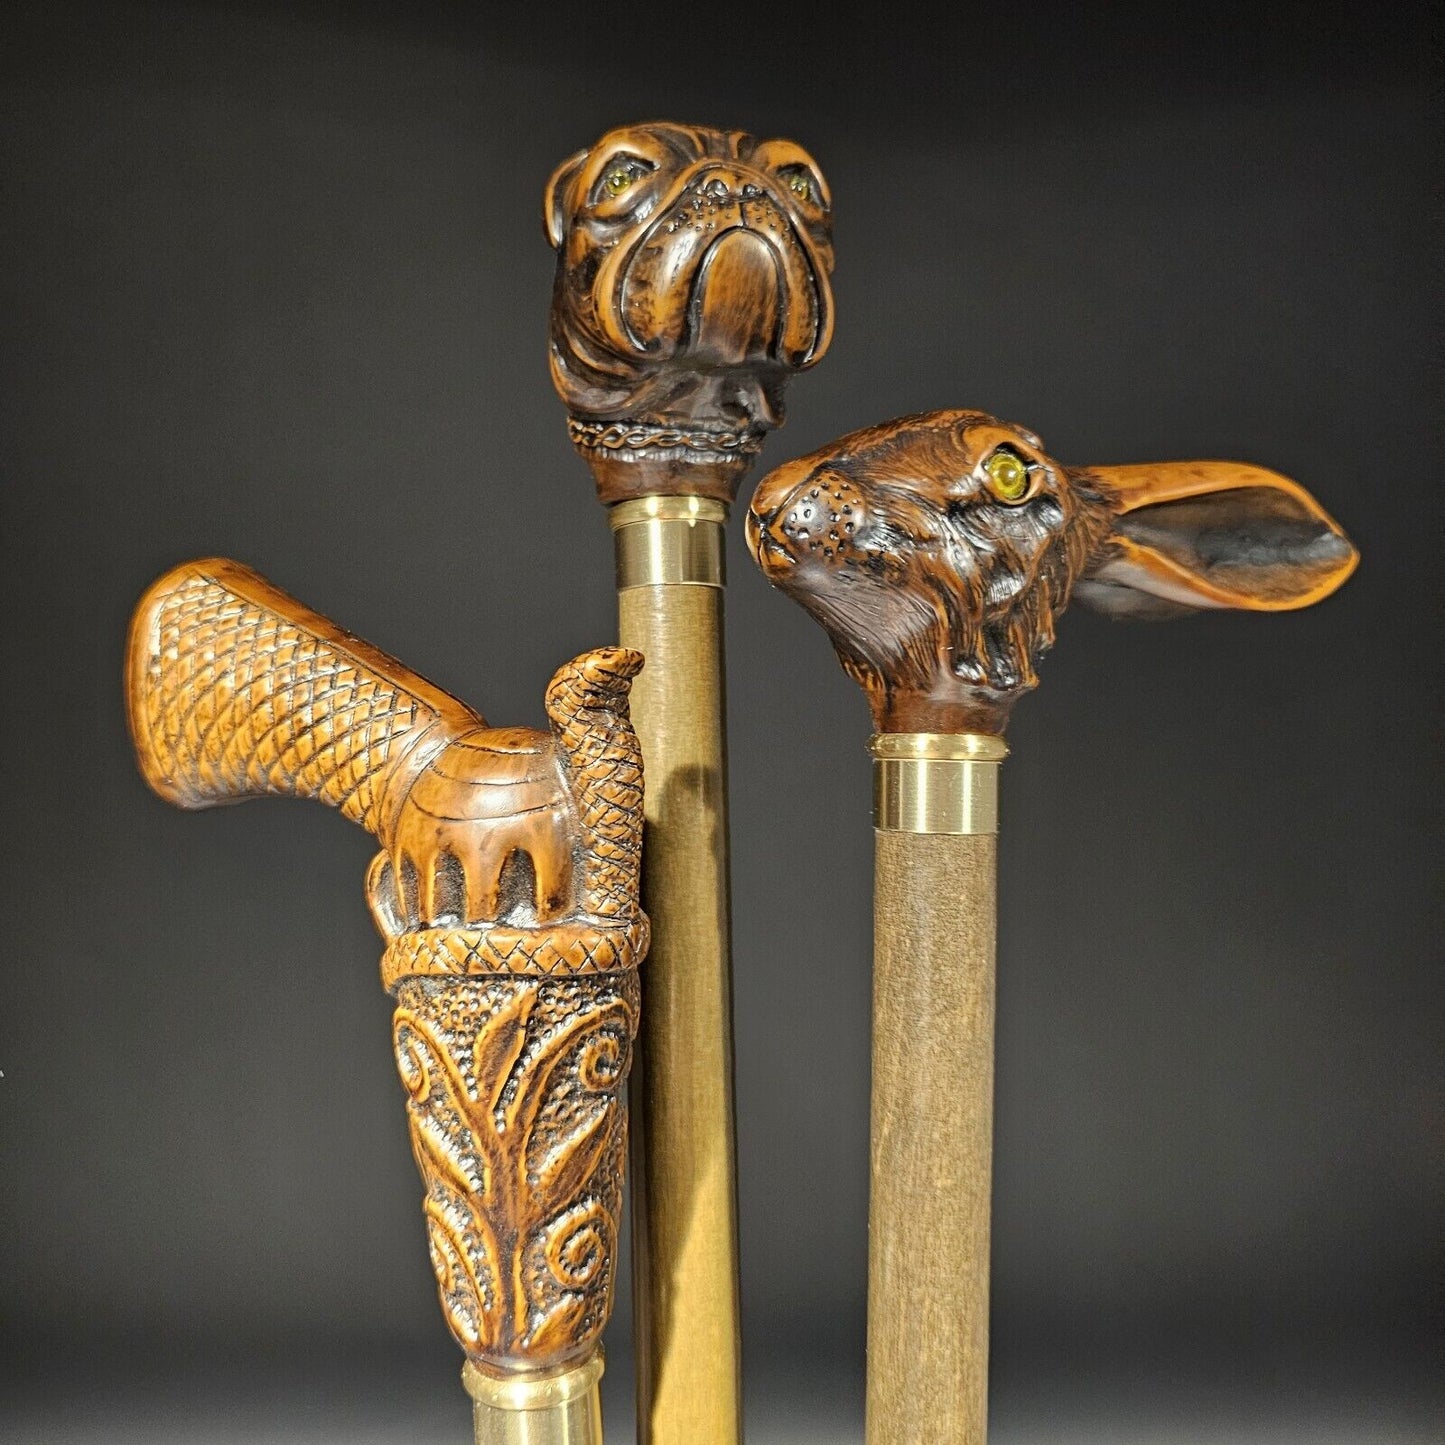 Lot of 3-36" Antique Style Figural Walking Stick Cane